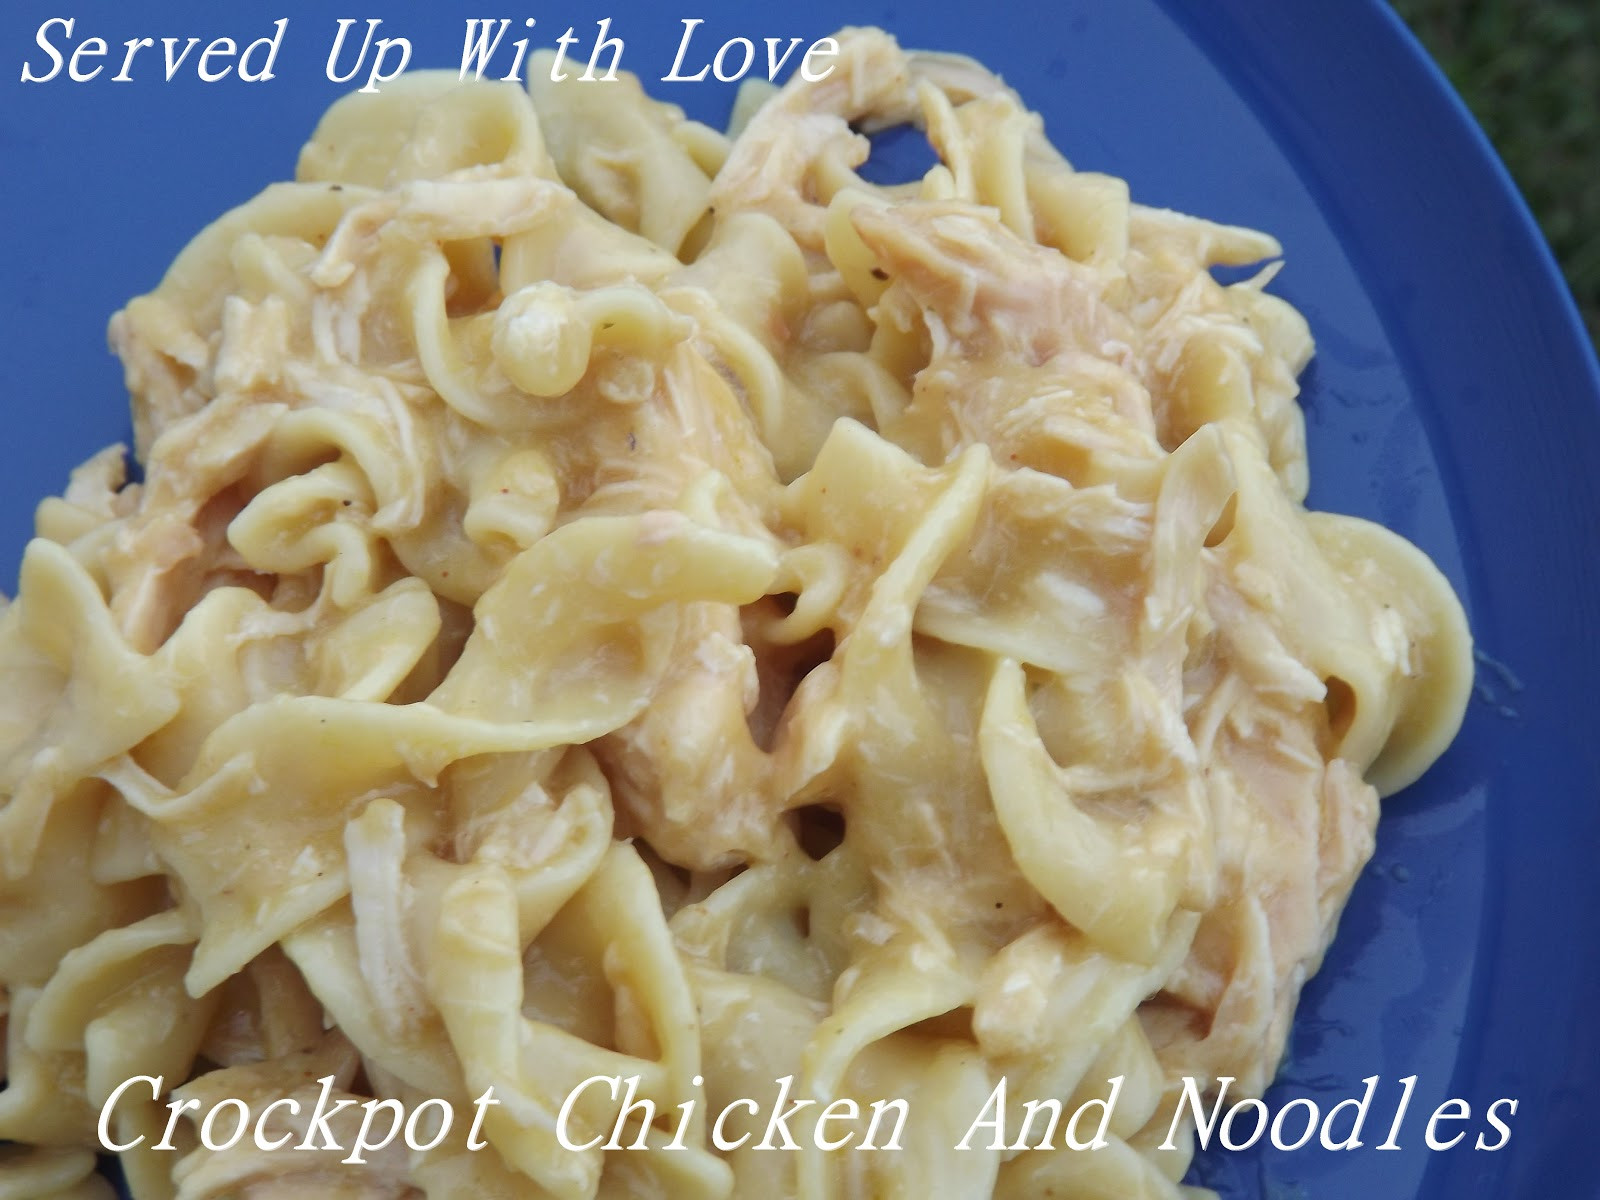 Crock Pot Chicken And Noodles
 Served Up With Love Crock Pot Chicken and Noodles